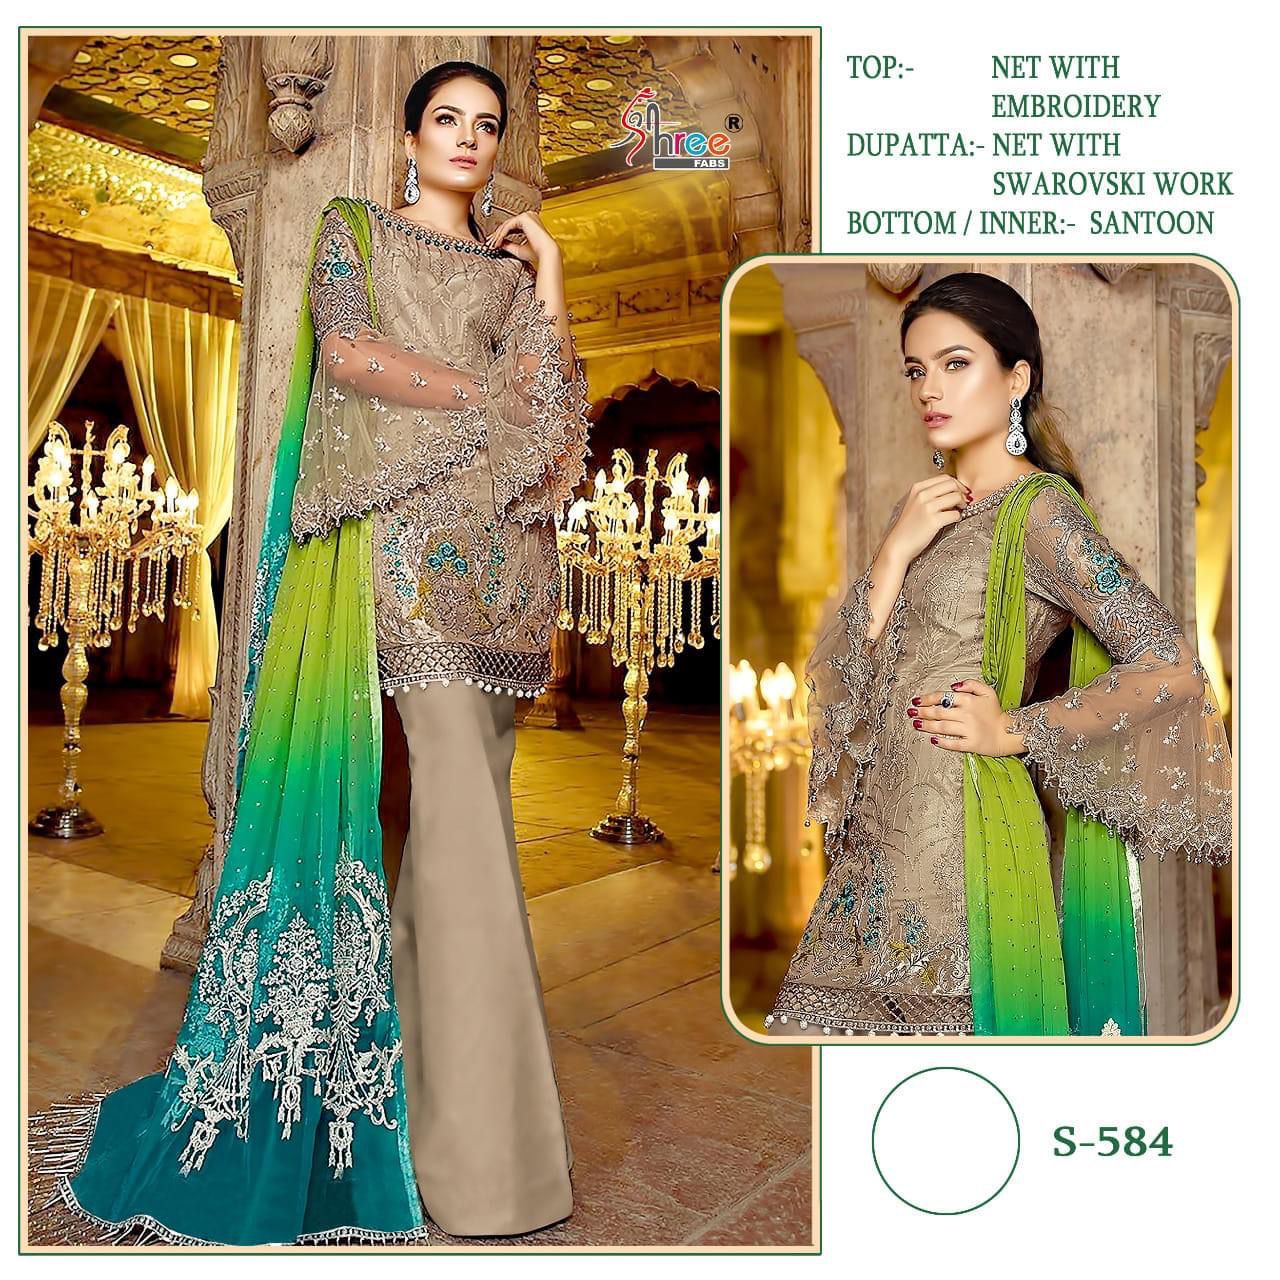 SHREE FABS S 584 PAKISTANI SUITS IN INDIA